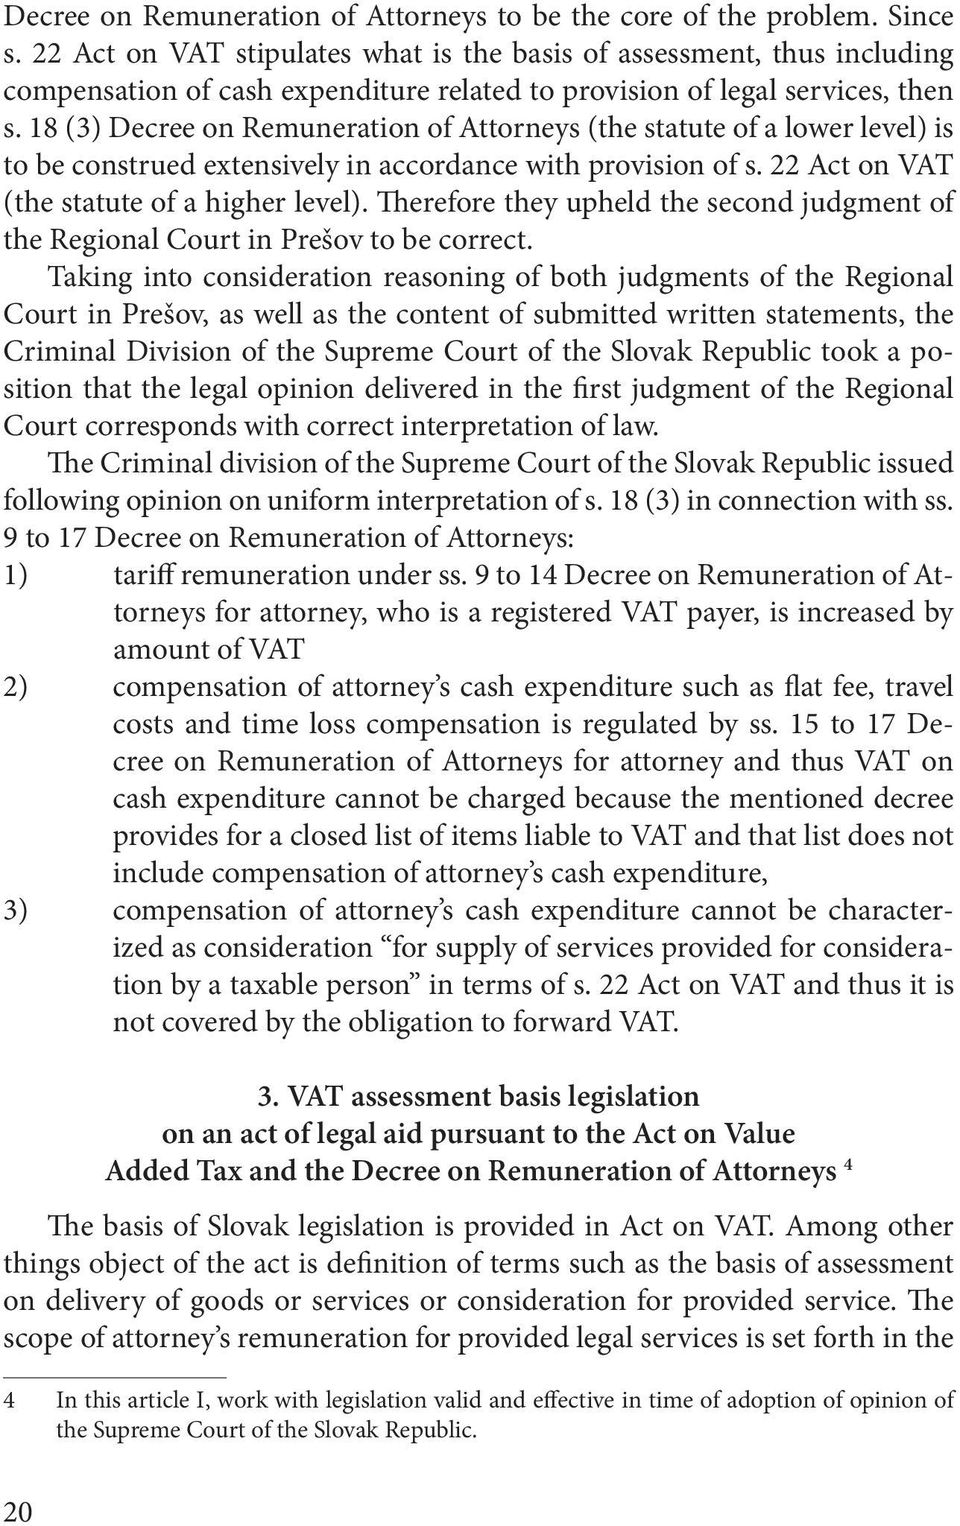 18 (3) Decree on Remuneration of Attorneys (the statute of a lower level) is to be construed extensively in accordance with provision of s. 22 Act on VAT (the statute of a higher level).